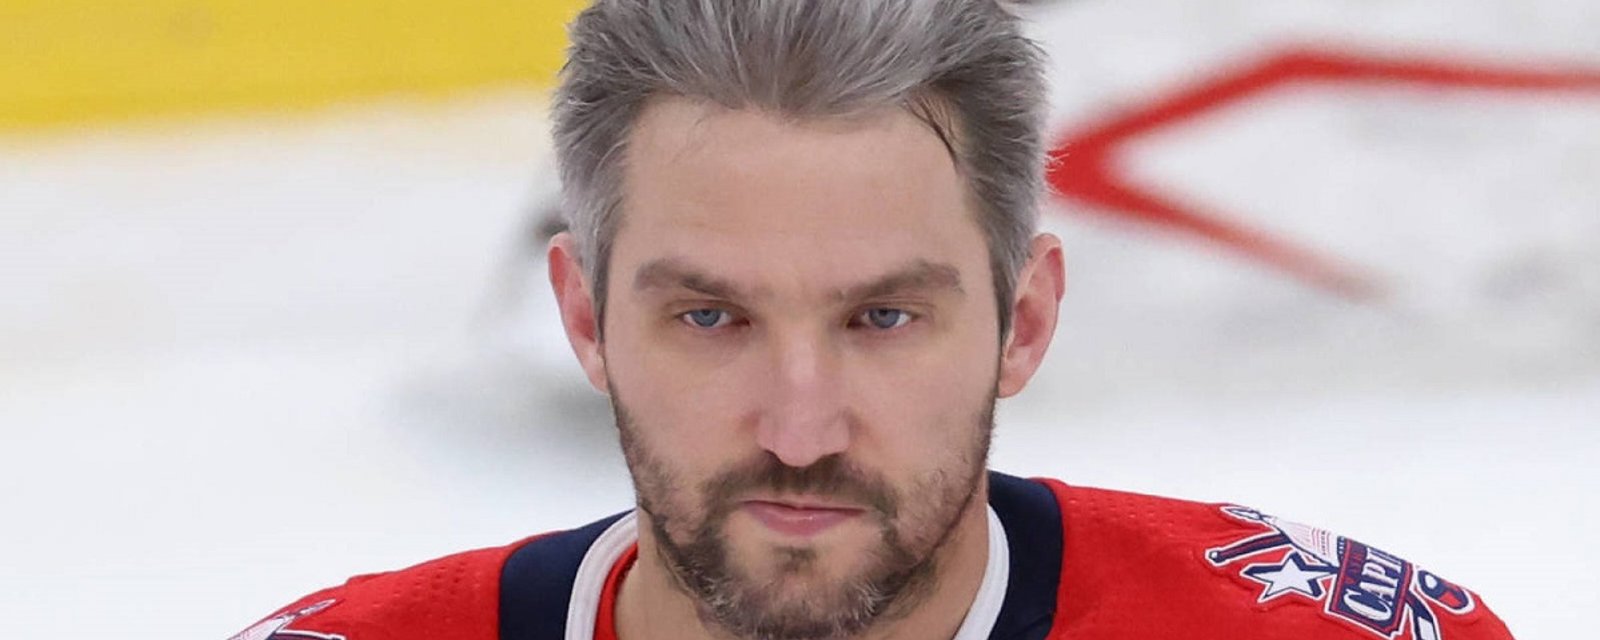 Fans in Washington troll Ovechkin with scathing signs at tonight's game.